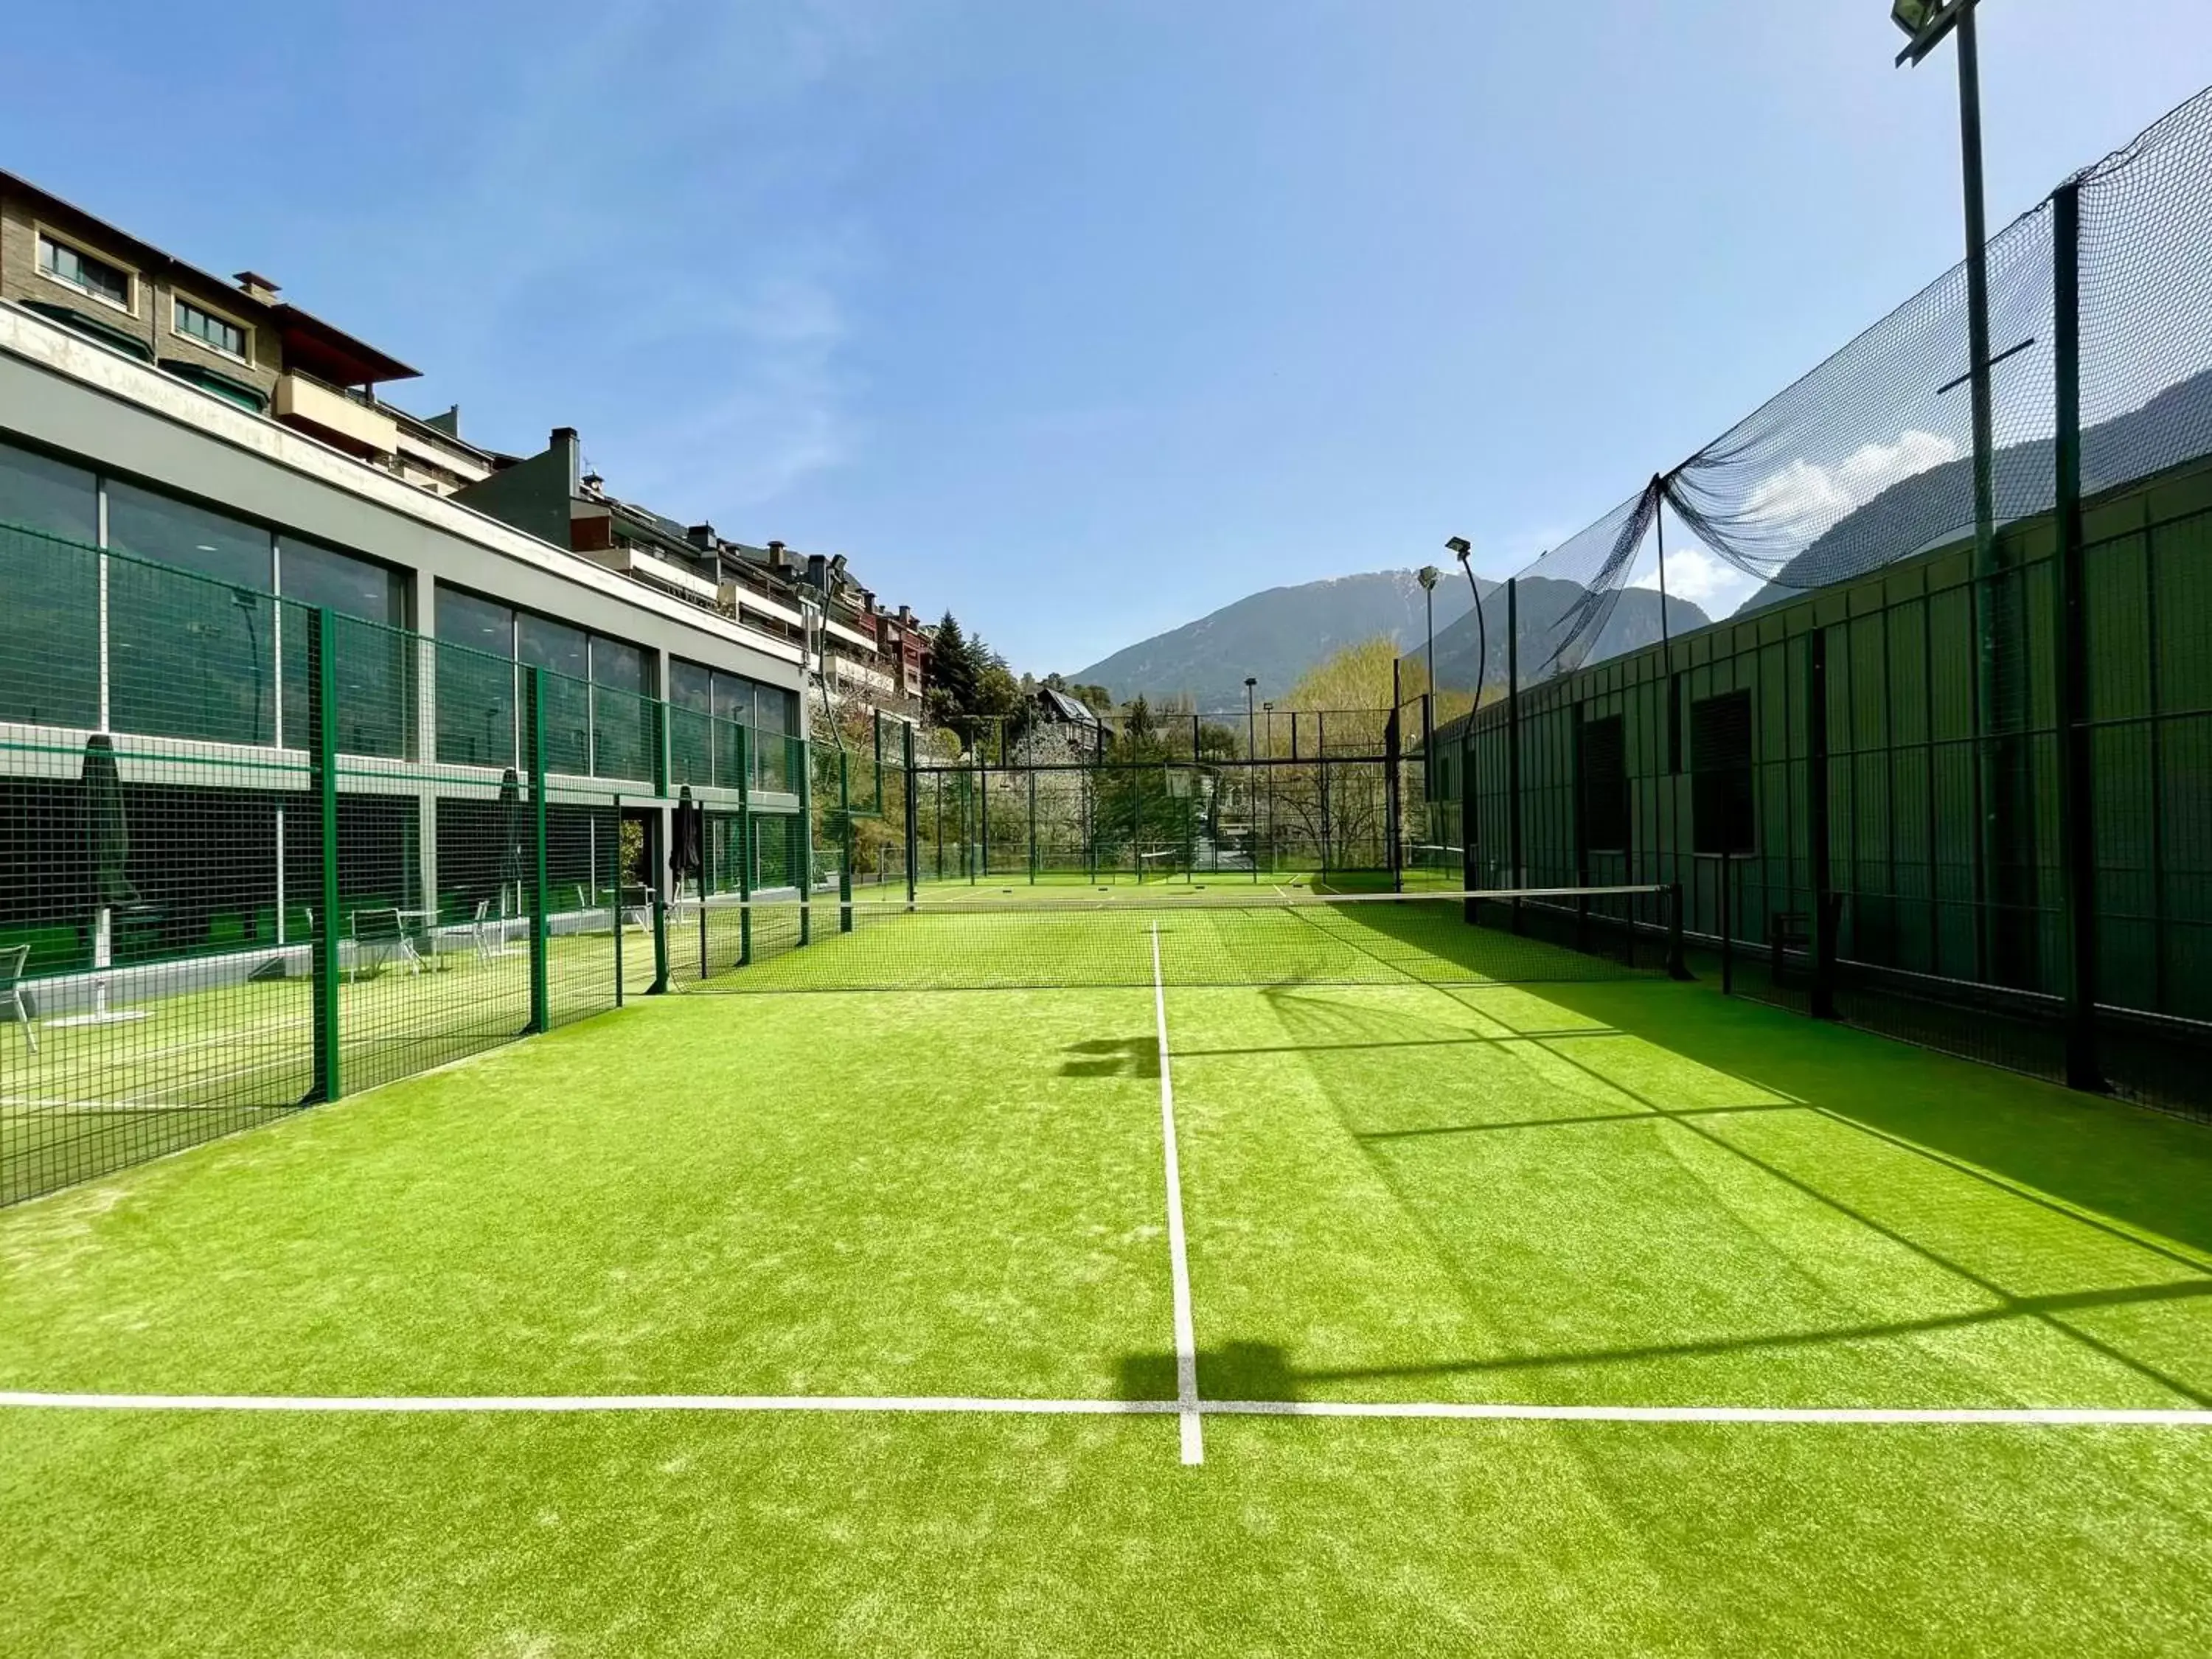 Sports, Other Activities in Andorra Park Hotel